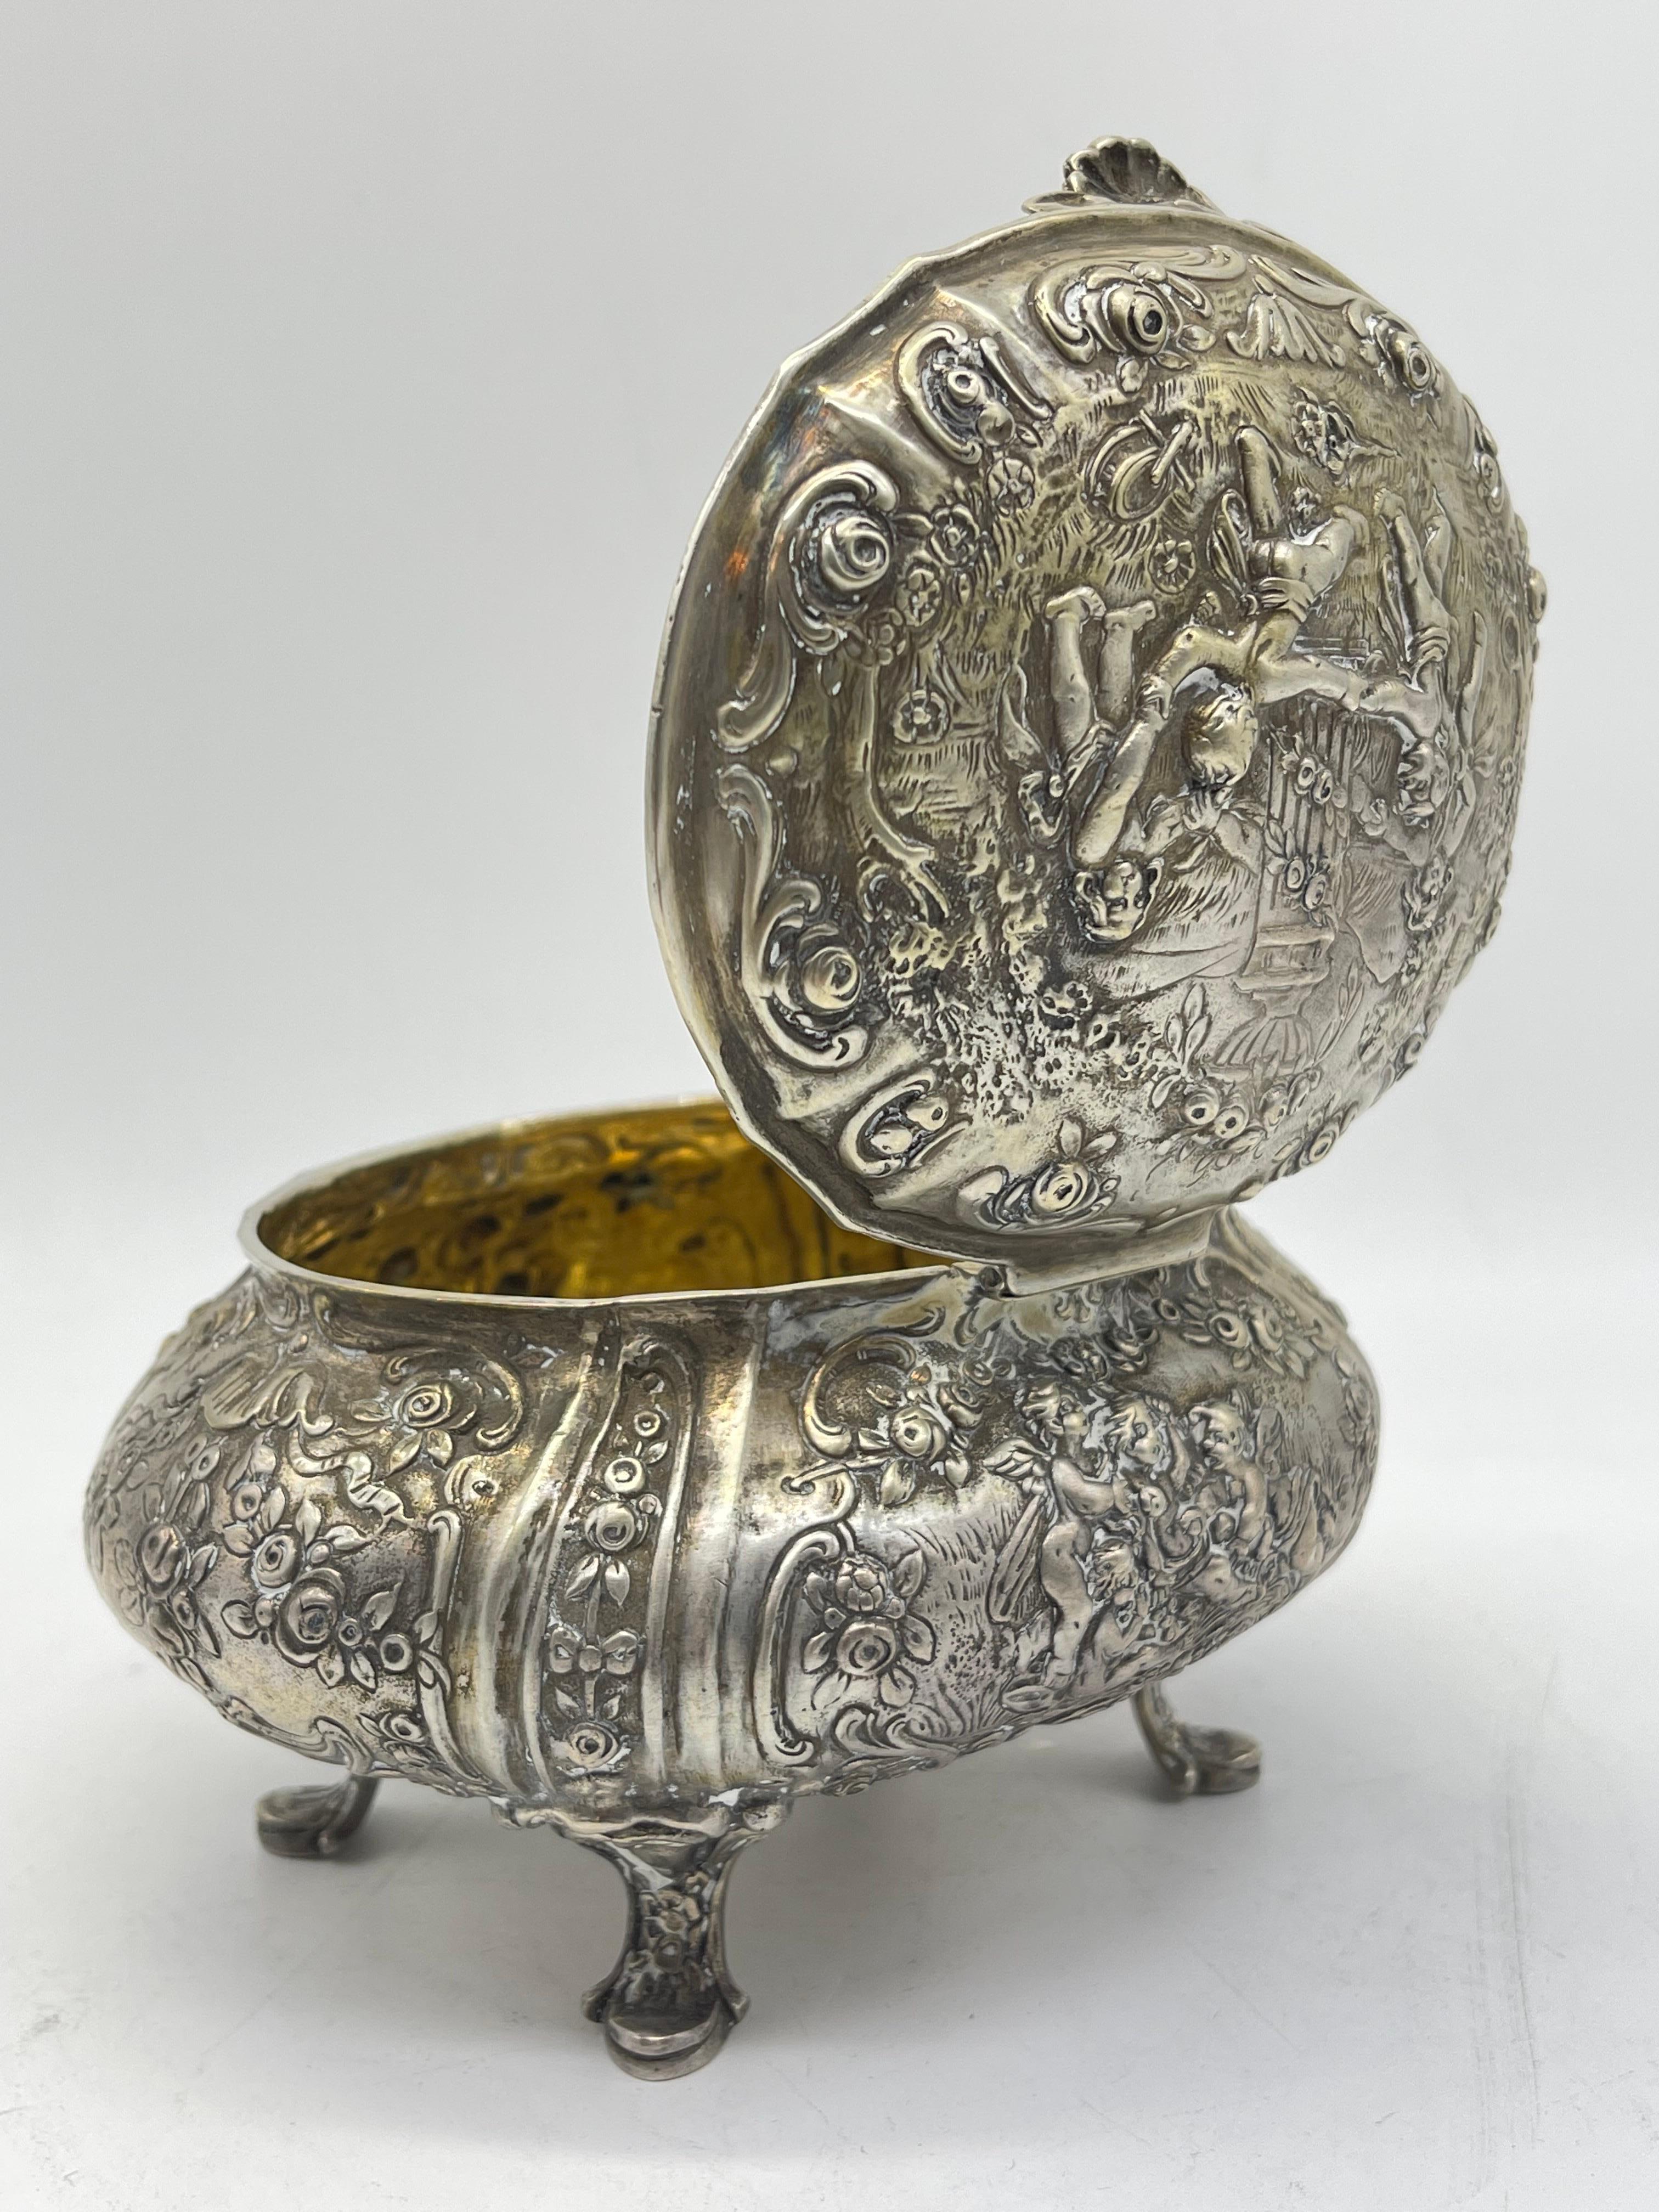 Exclusive Bonboniere / Sugar Lidded box 800 Silver Germany gilded, Flowers Putto For Sale 13